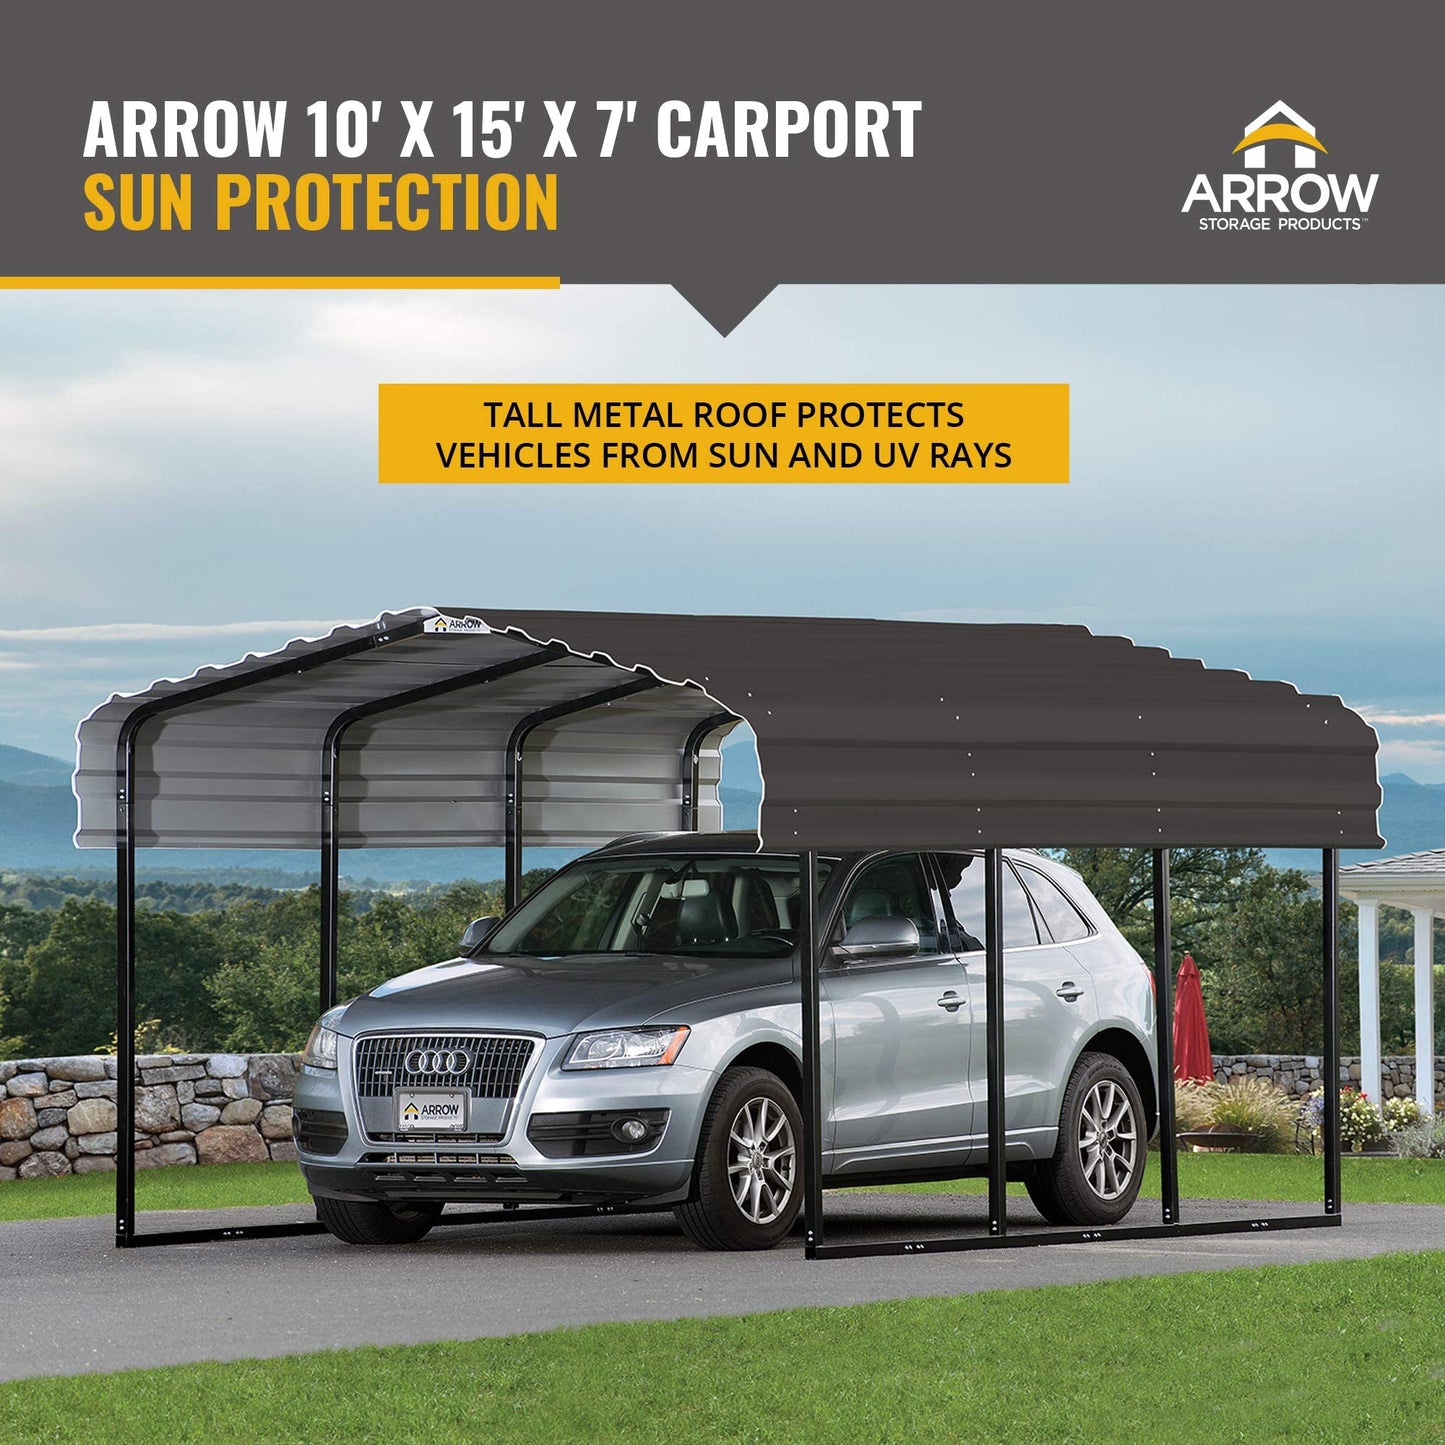 Arrow Shed CPHC101507 Heavy Duty Galvanized Steel Metal Multi-Use Shelter, Shade, Carport, 10' x 15' x 7' Carport Only Charcoal 10' x 15' x 7'